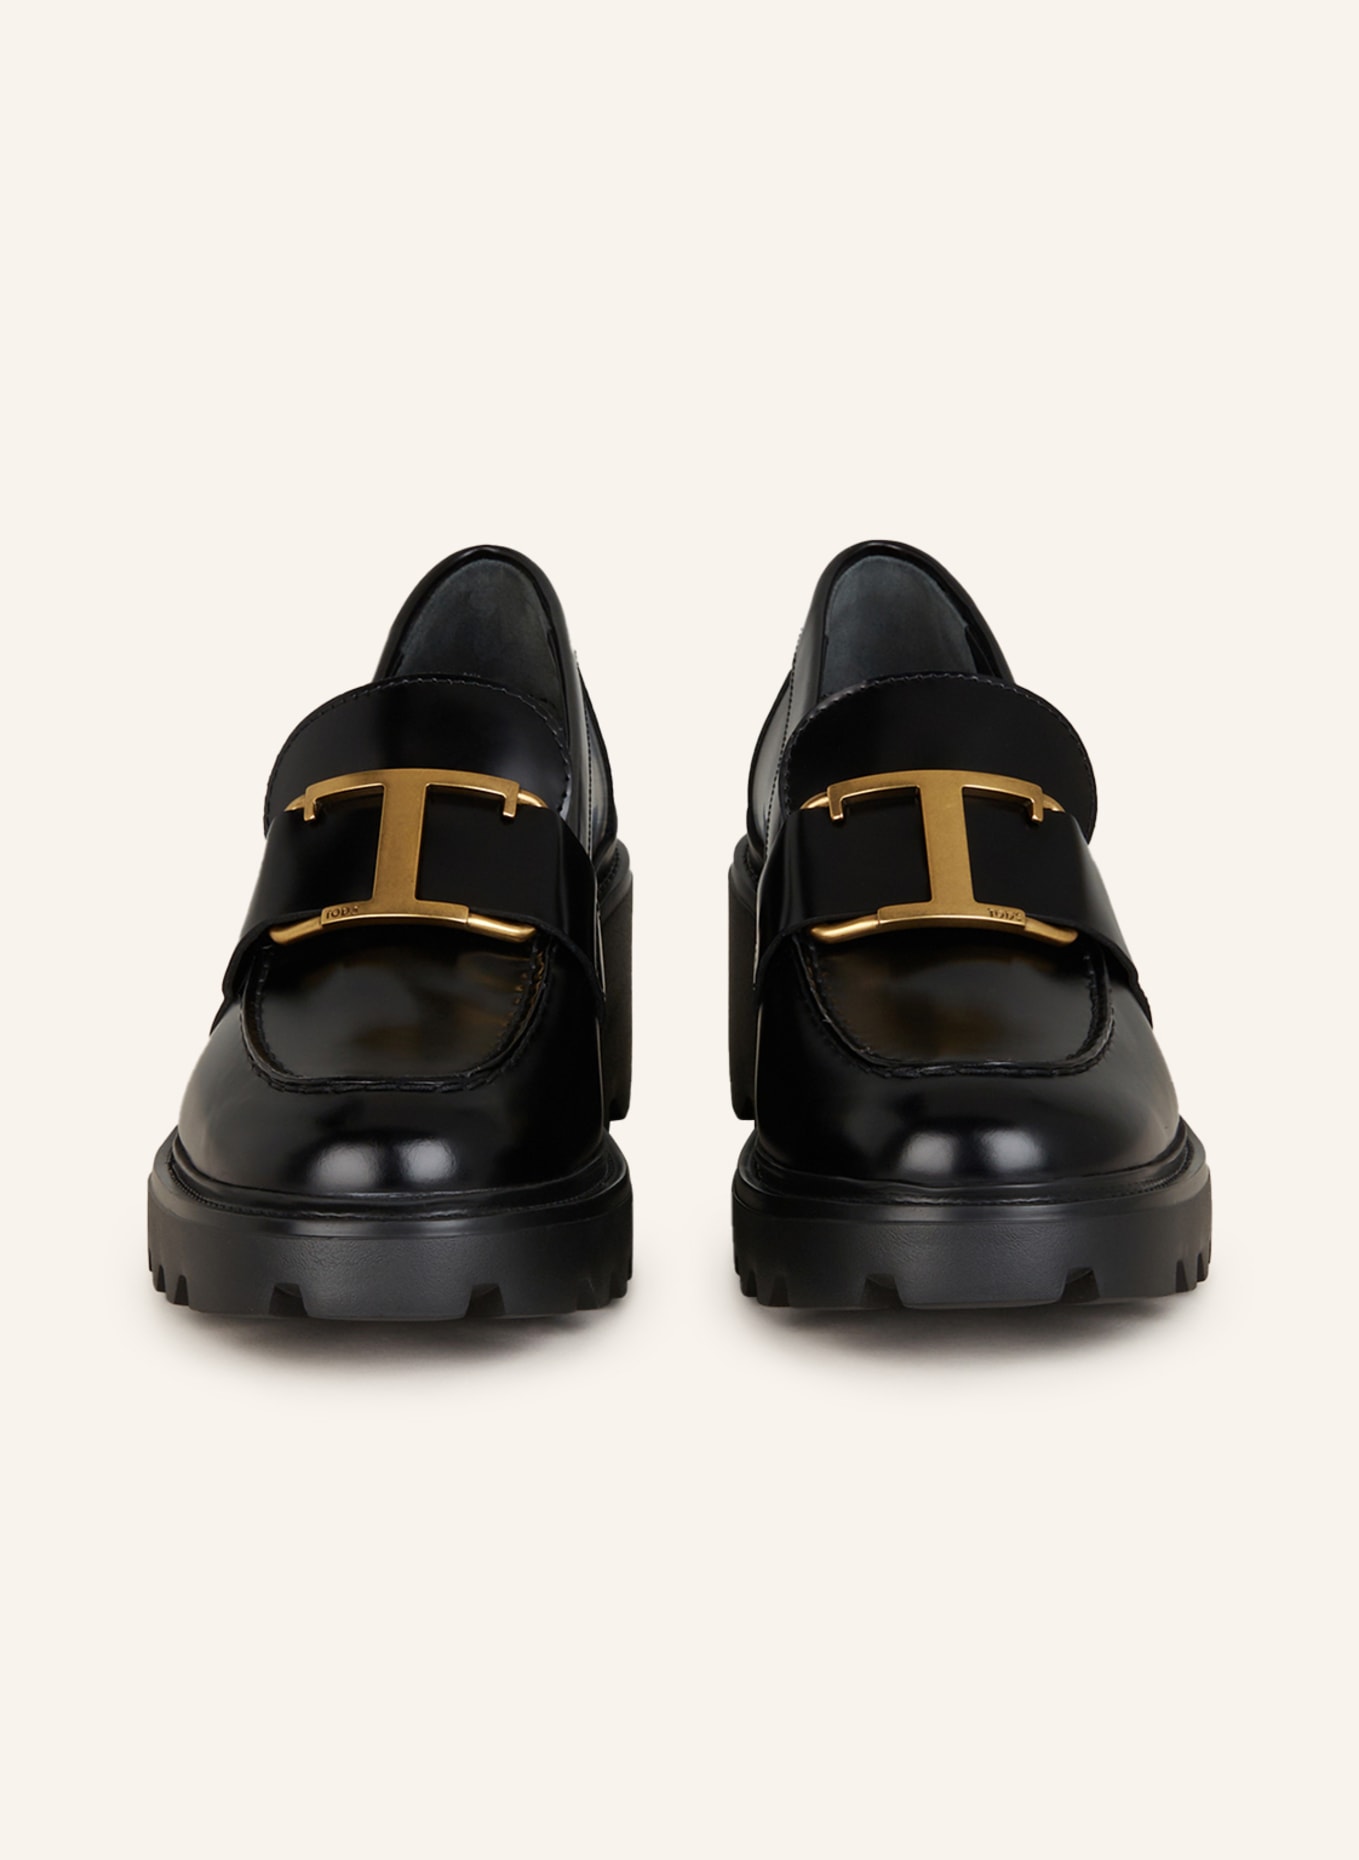 TOD'S Loafers, Color: BLACK (Image 3)